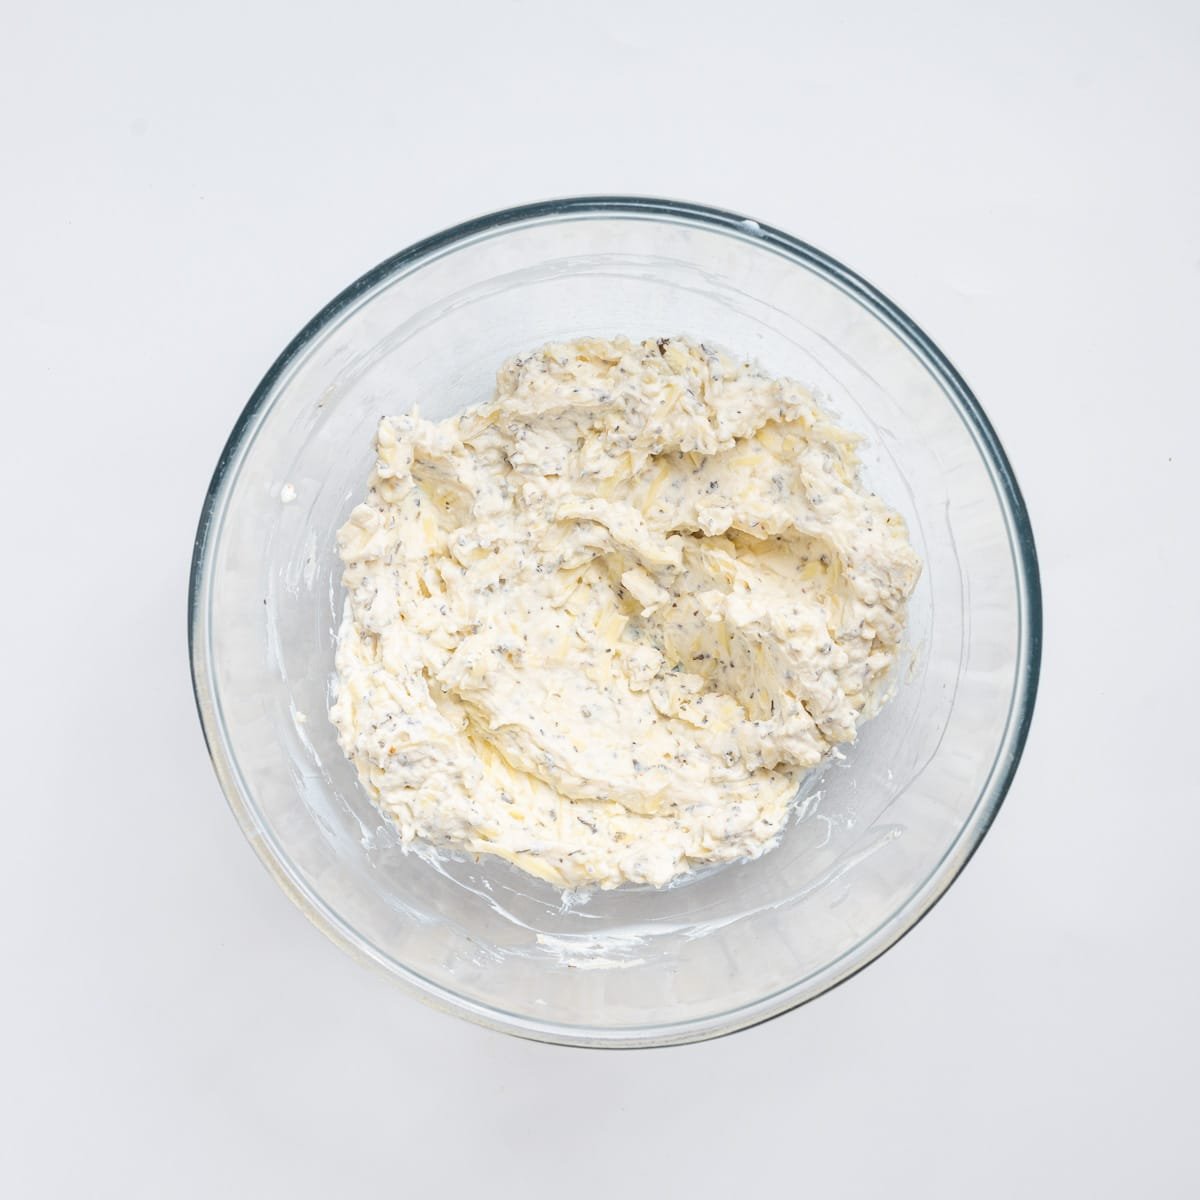 An image of the ricotta cheese mixture, mixed together ina a glass bowl.